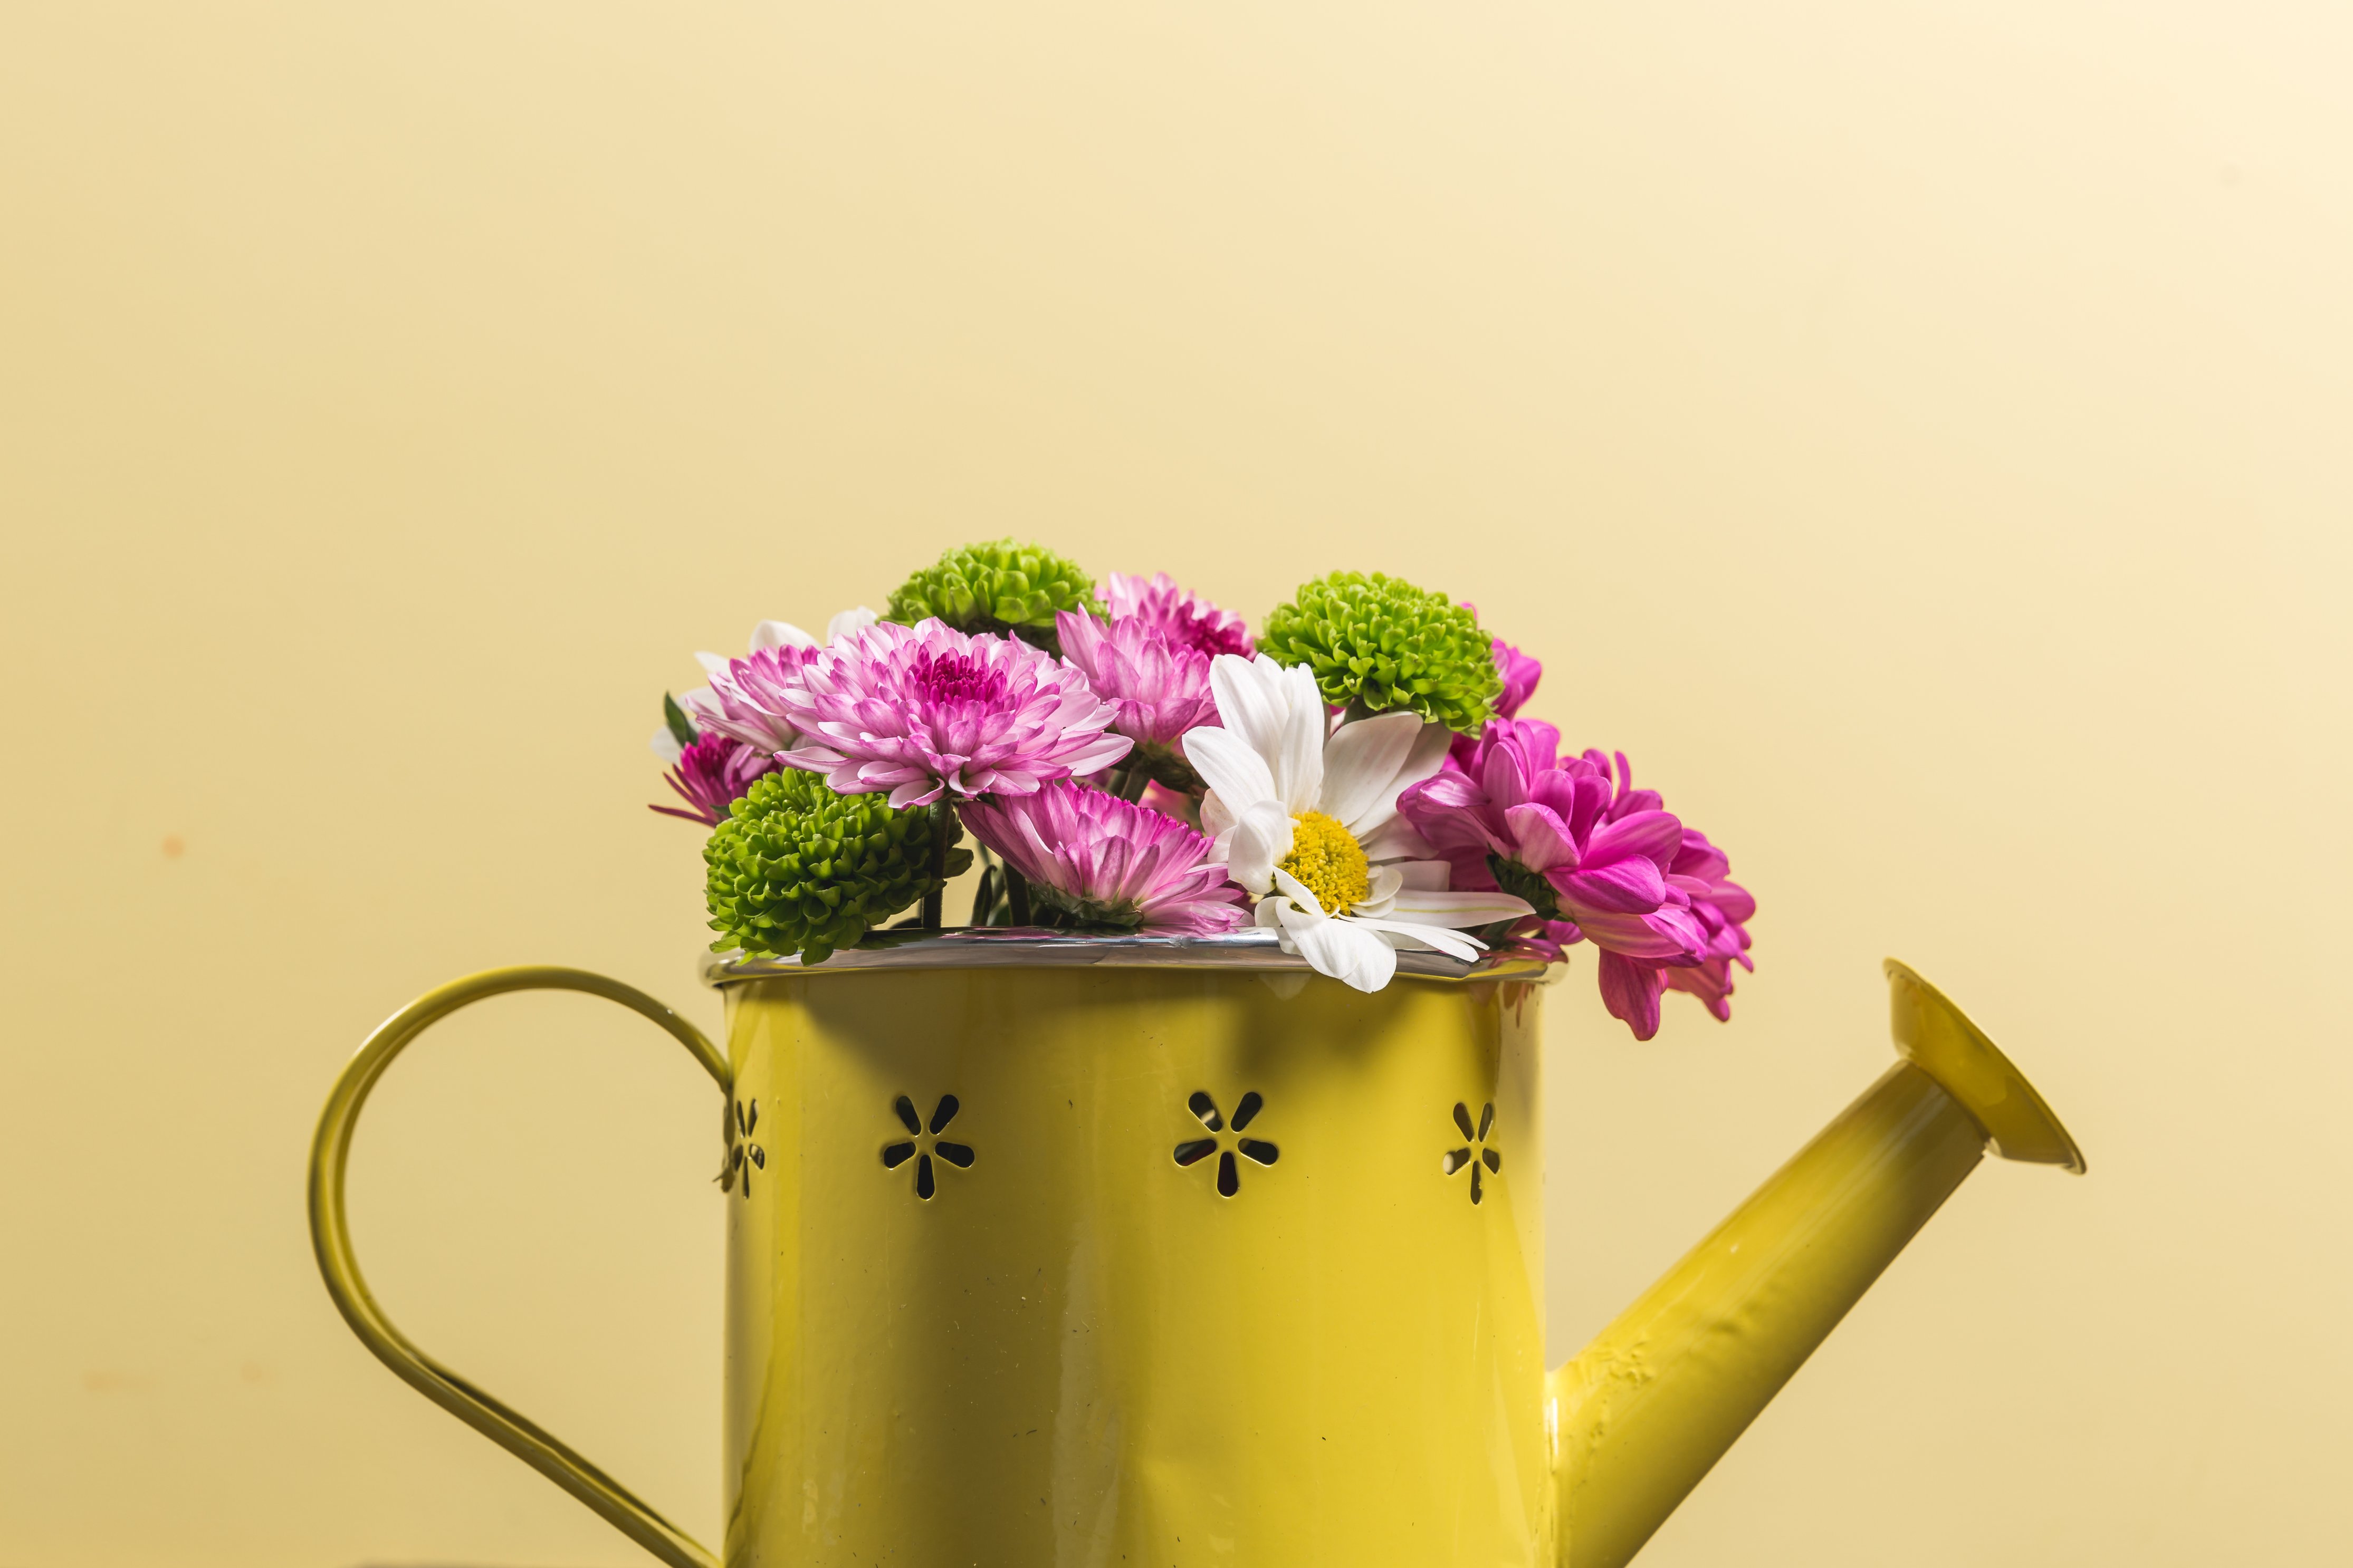 Flower Watering Can 4460x2973